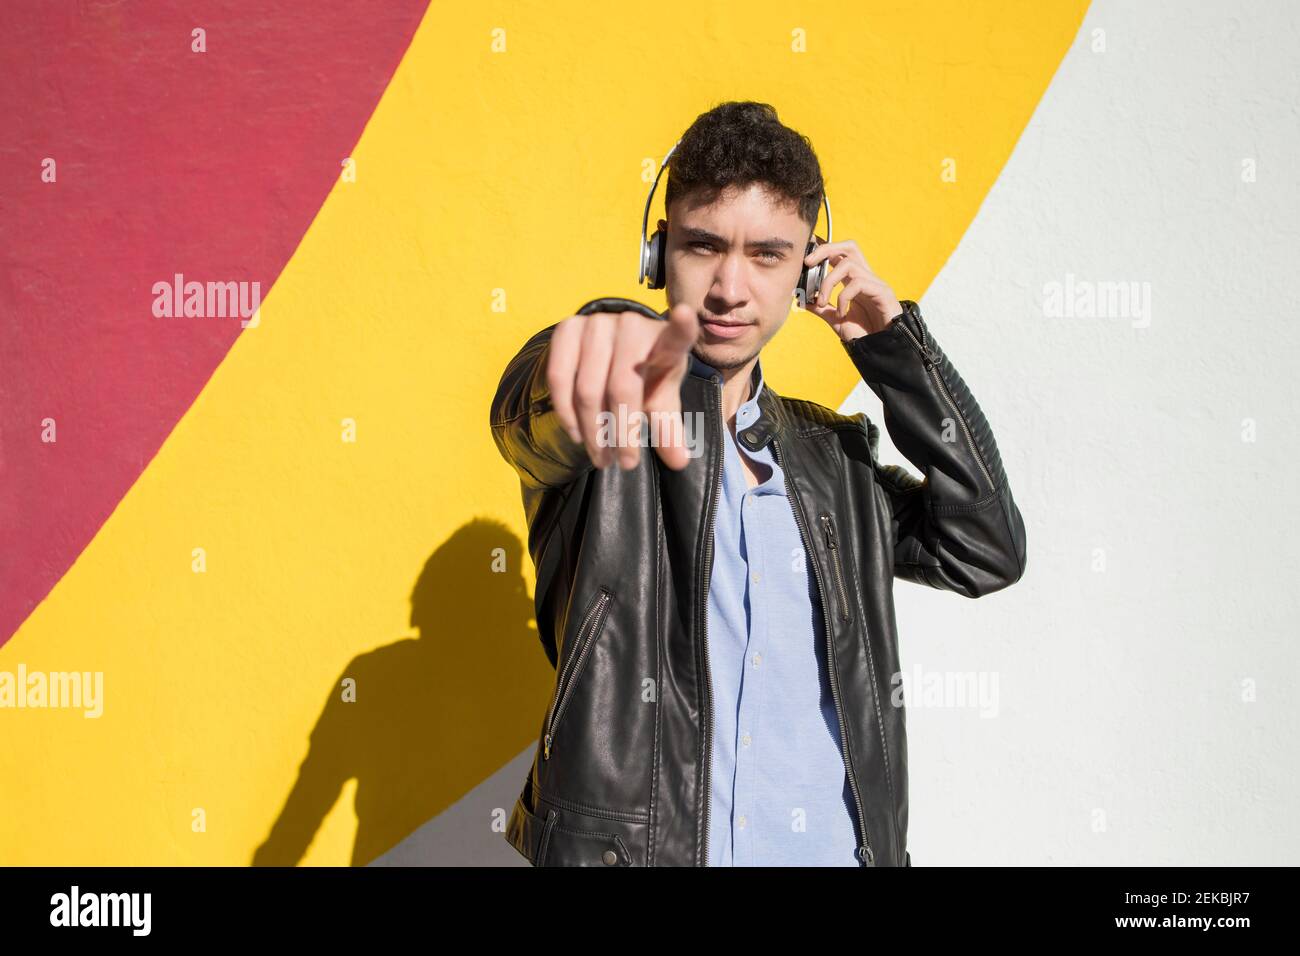 Smiling young man throwing papers while standing against colorful wall Stock Photo